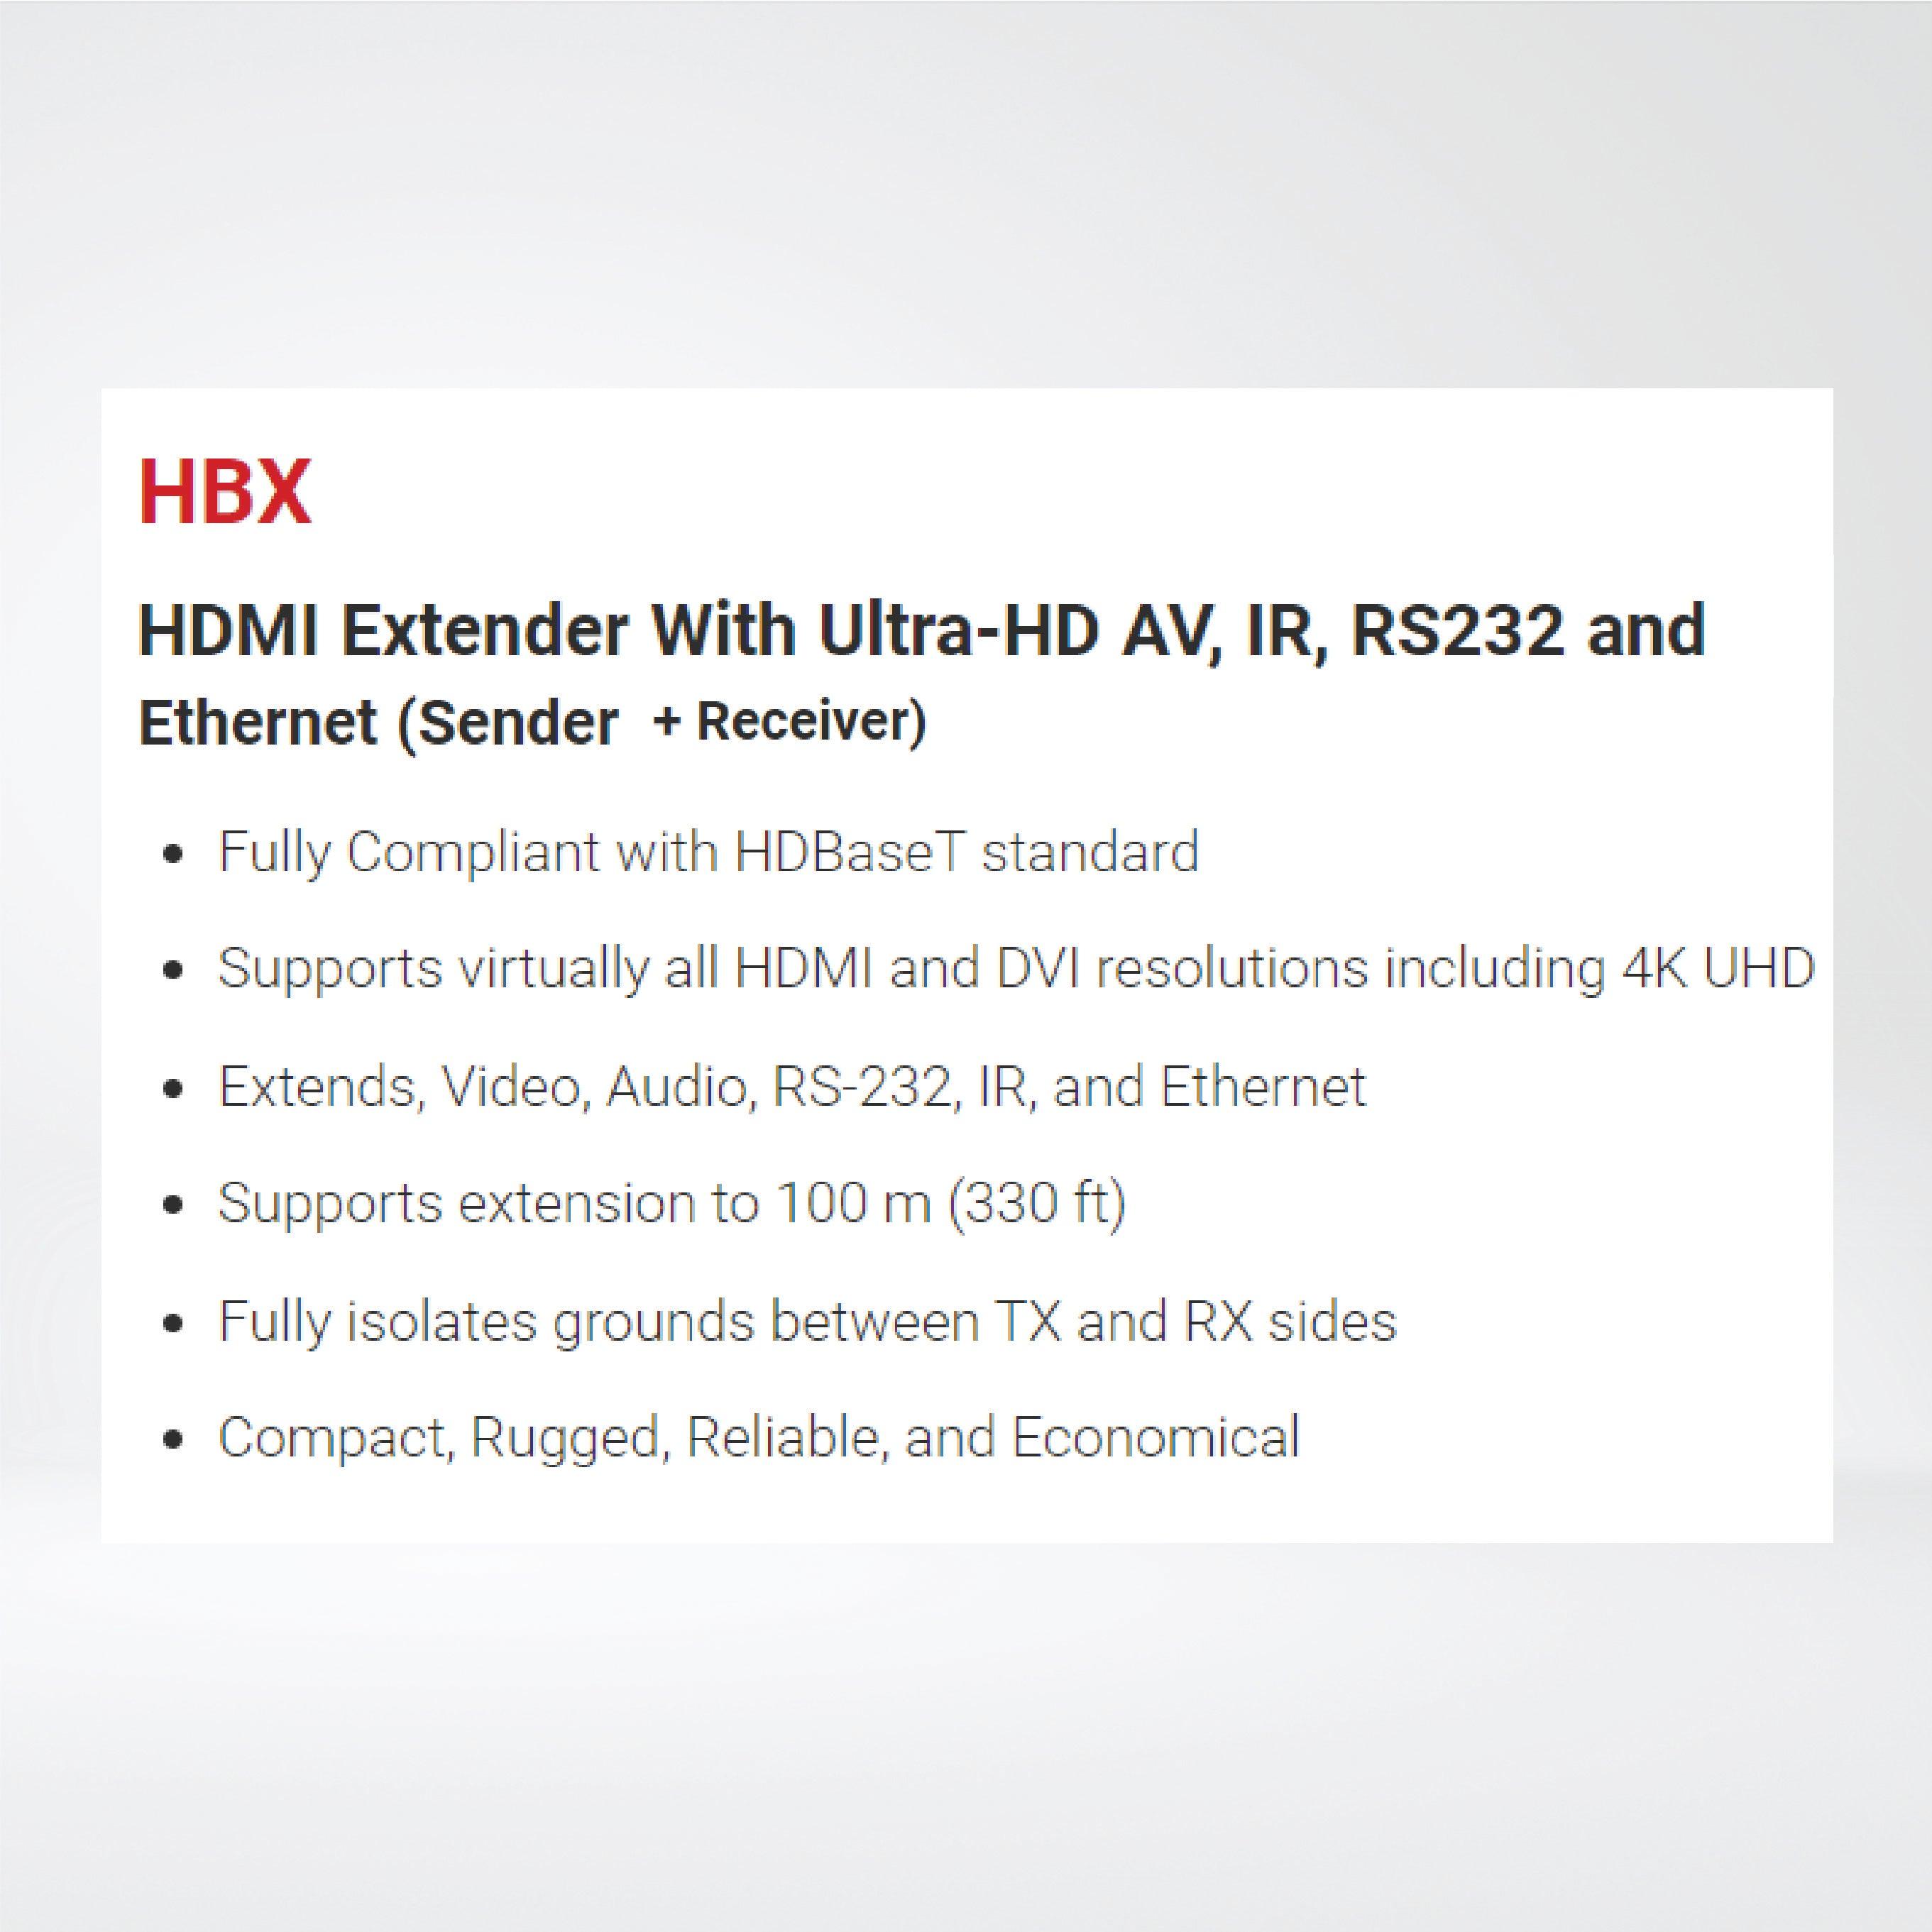 HBX HDMI Extender With Ultra-HD AV, IR, RS232 and Ethernet (Sender + Receiver) - Riverplus